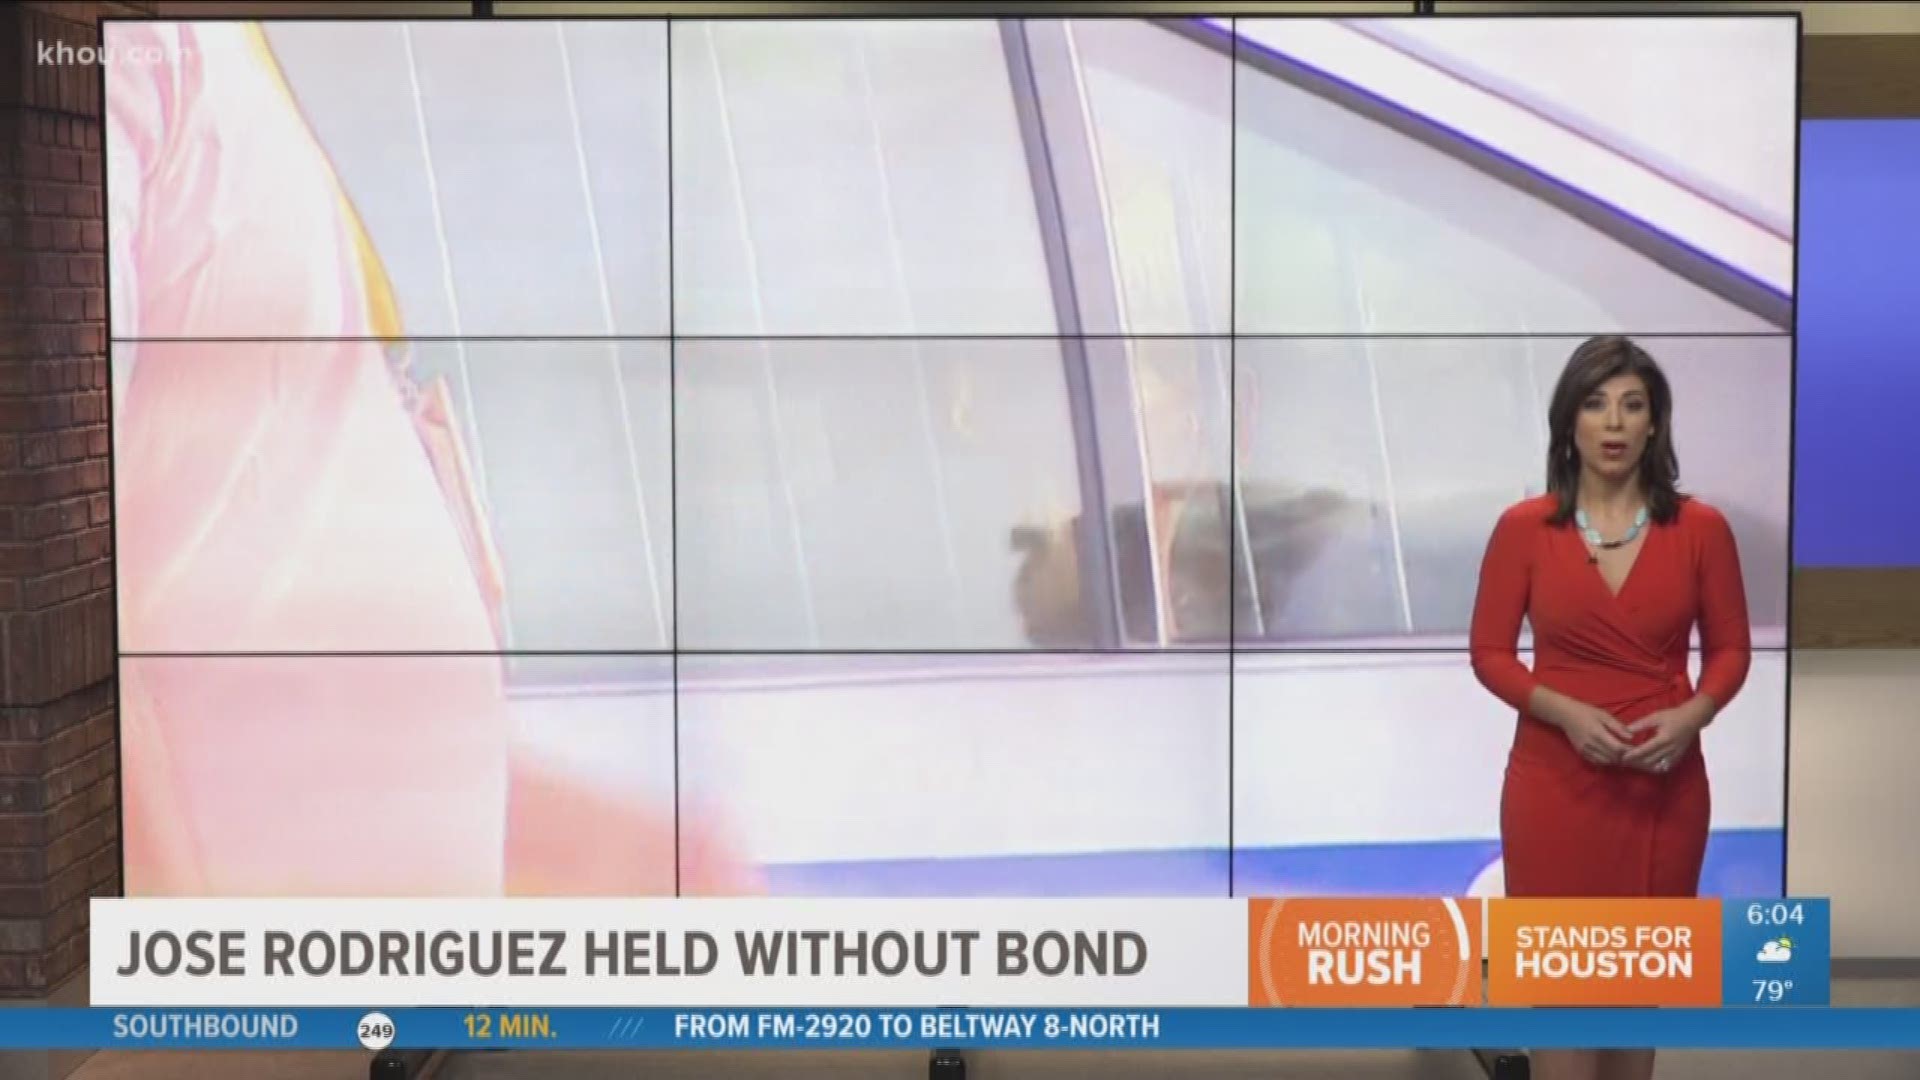 Murder suspect Jose Rodriguez is held without bond and Bregman is named All-Star MVP, these are a few of our headlines this Wednesday morning at 6 a.m.